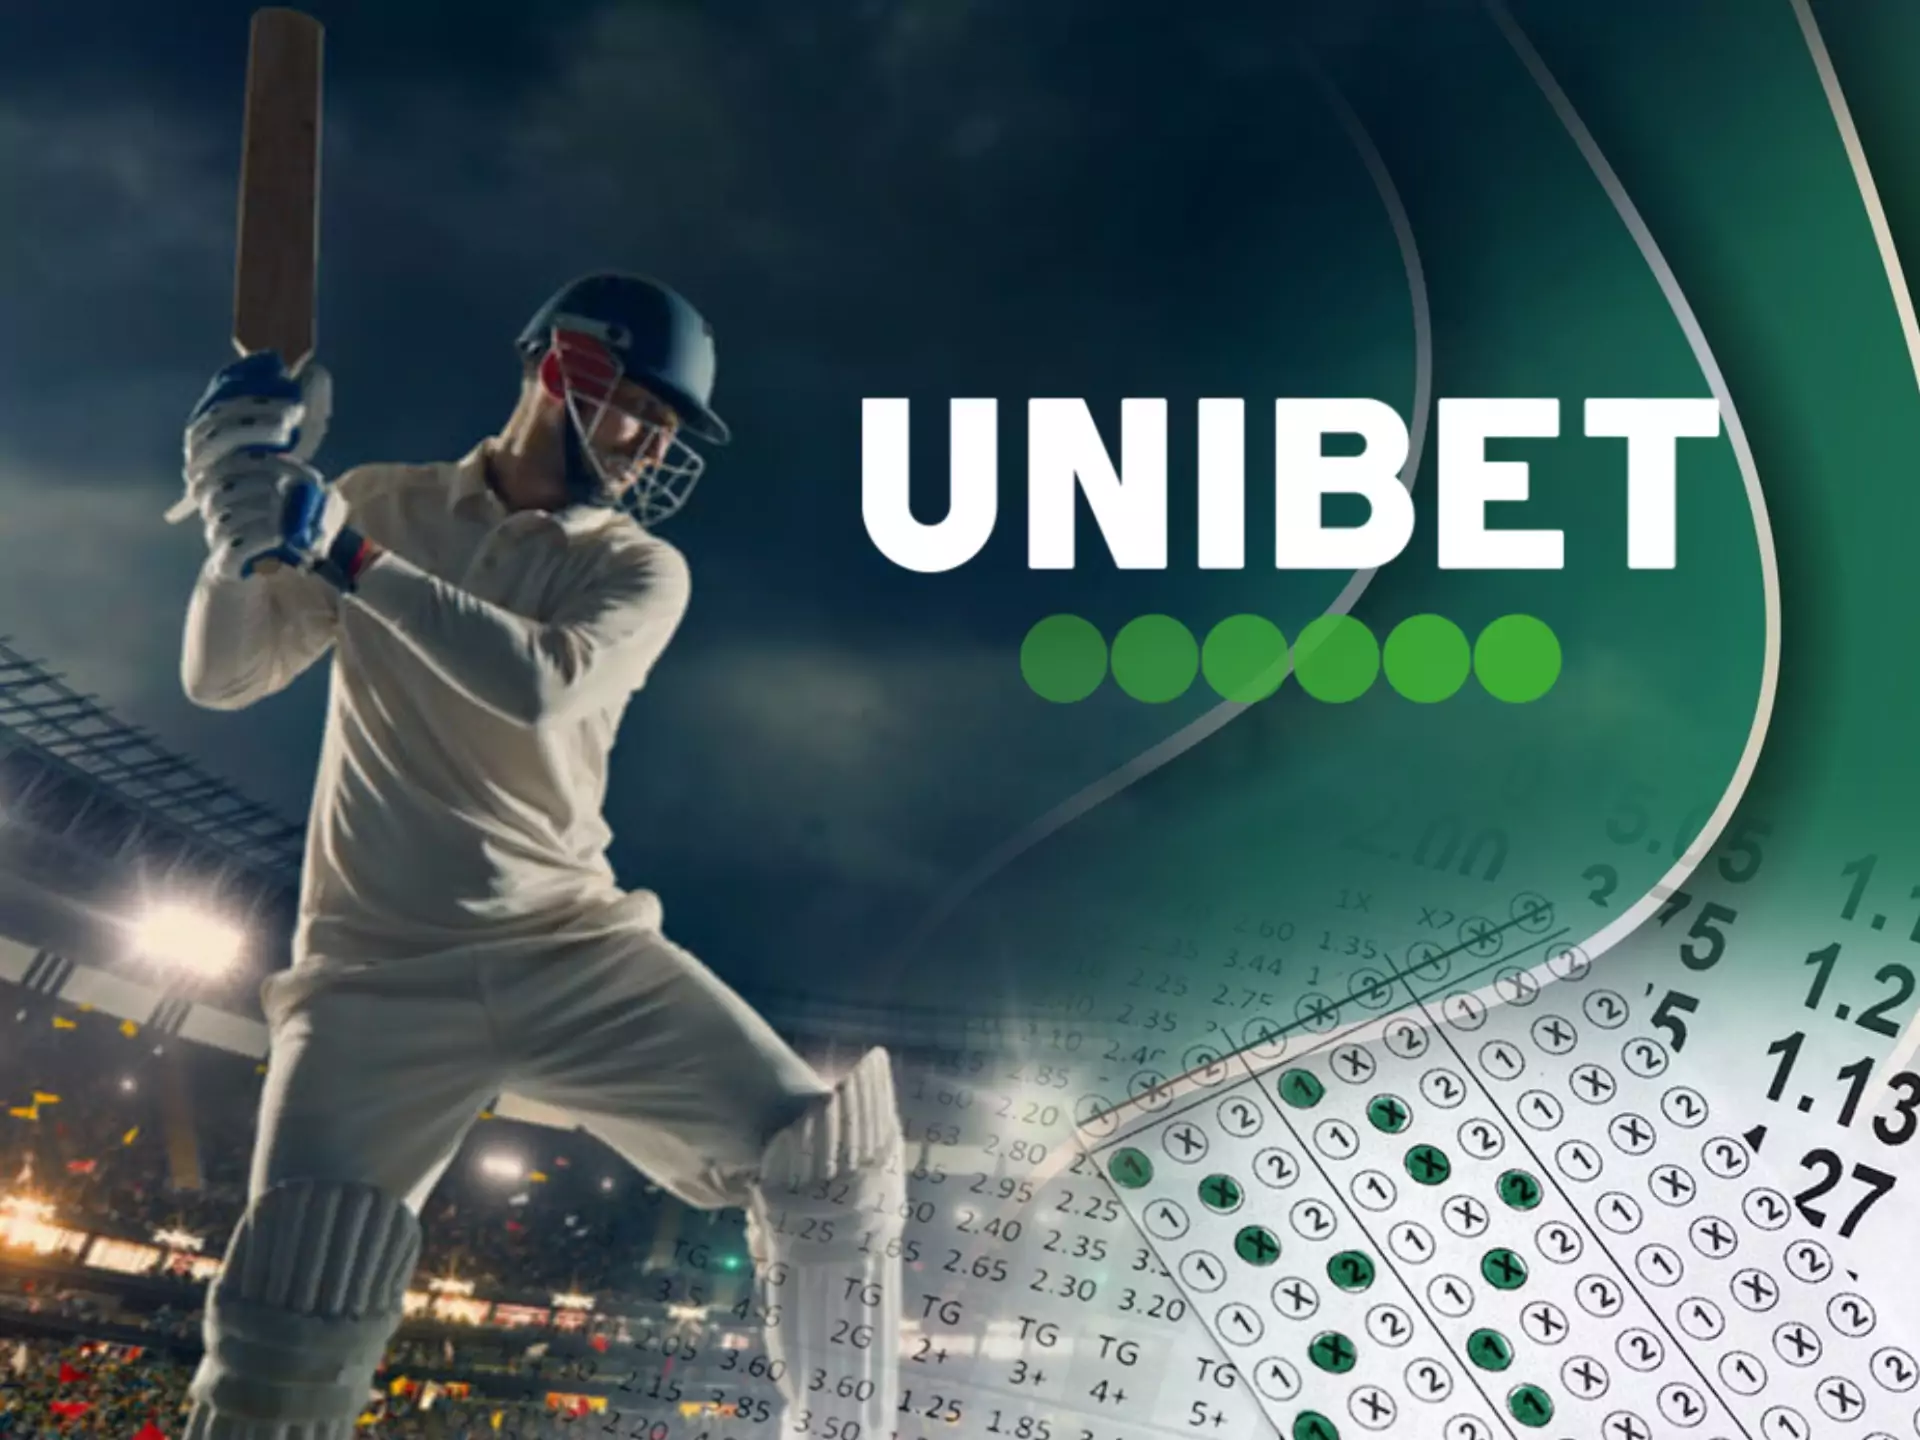 Choose Unibet for betting on the IPL matches.